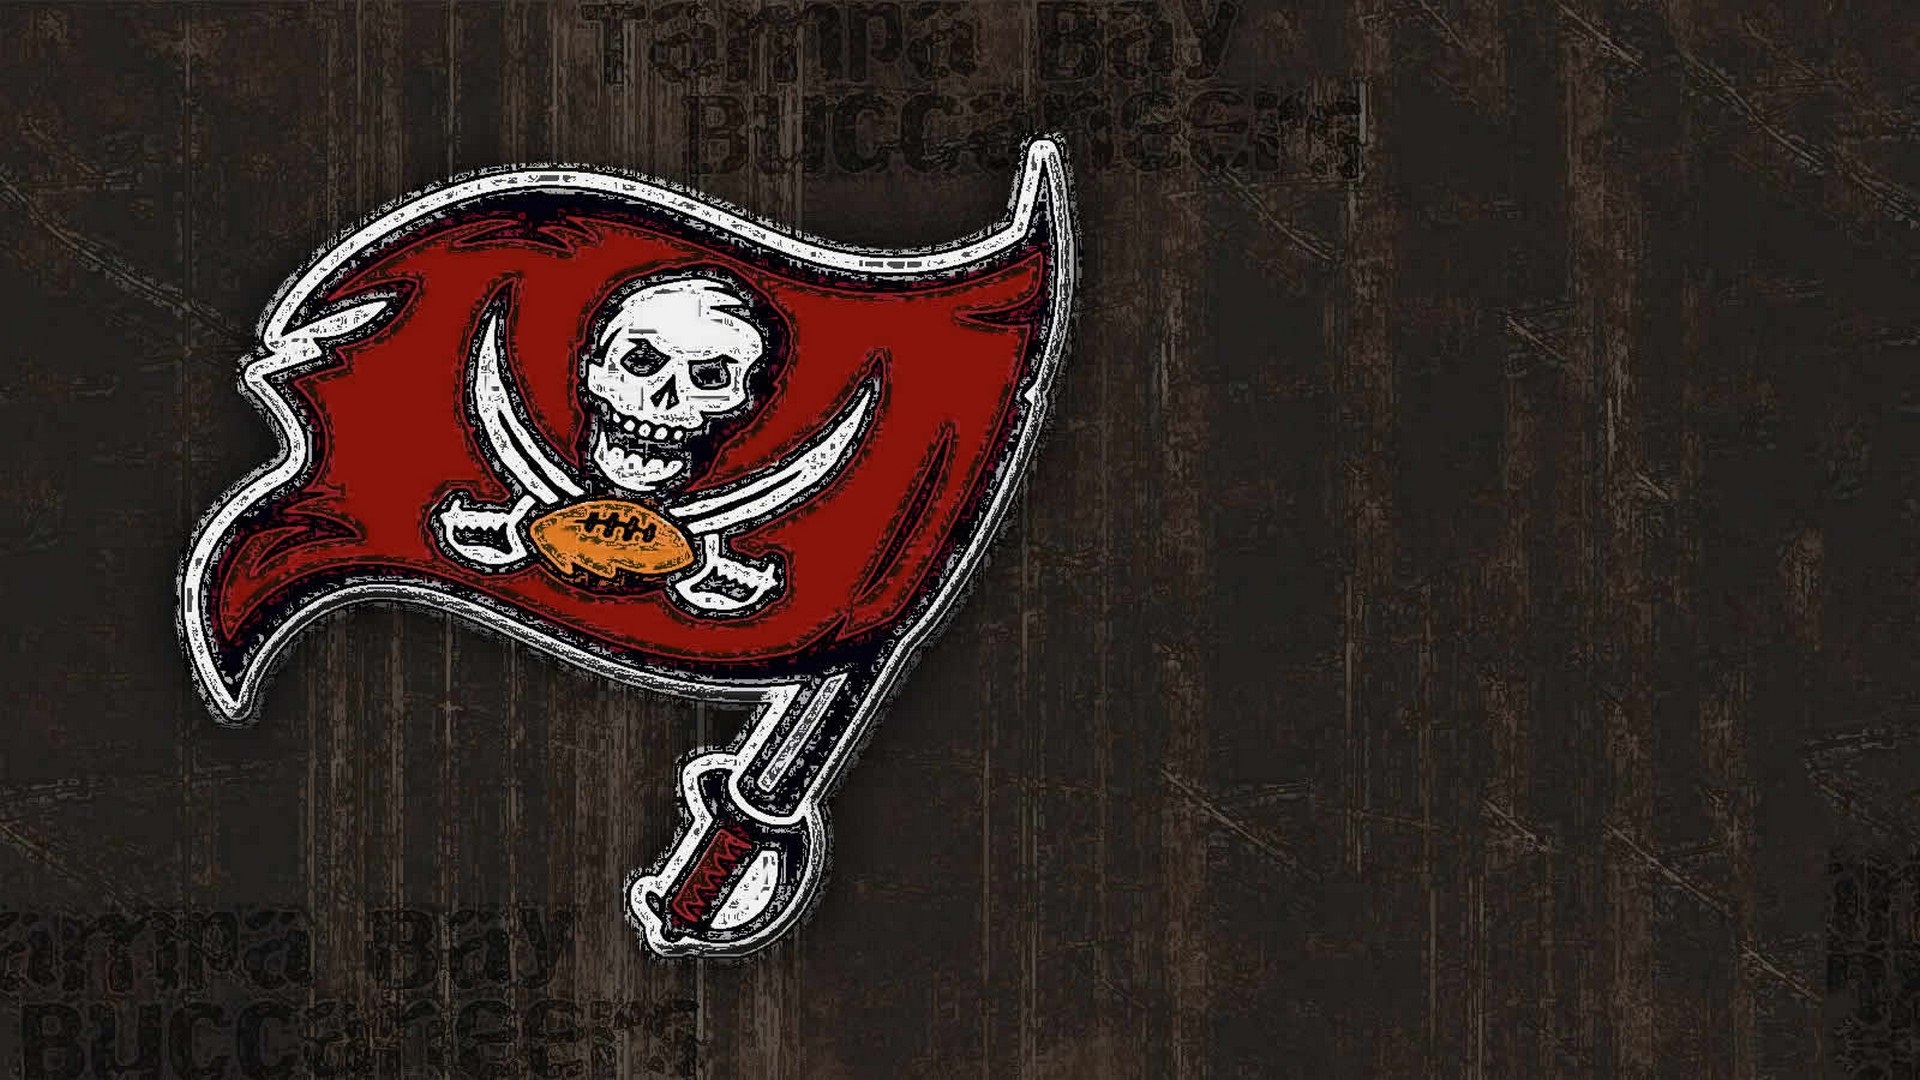 Buccaneers For Desktop Wallpaper with high-resolution 1920x1080 pixel. You can use this wallpaper for your Mac or Windows Desktop Background, iPhone, Android or Tablet and another Smartphone device